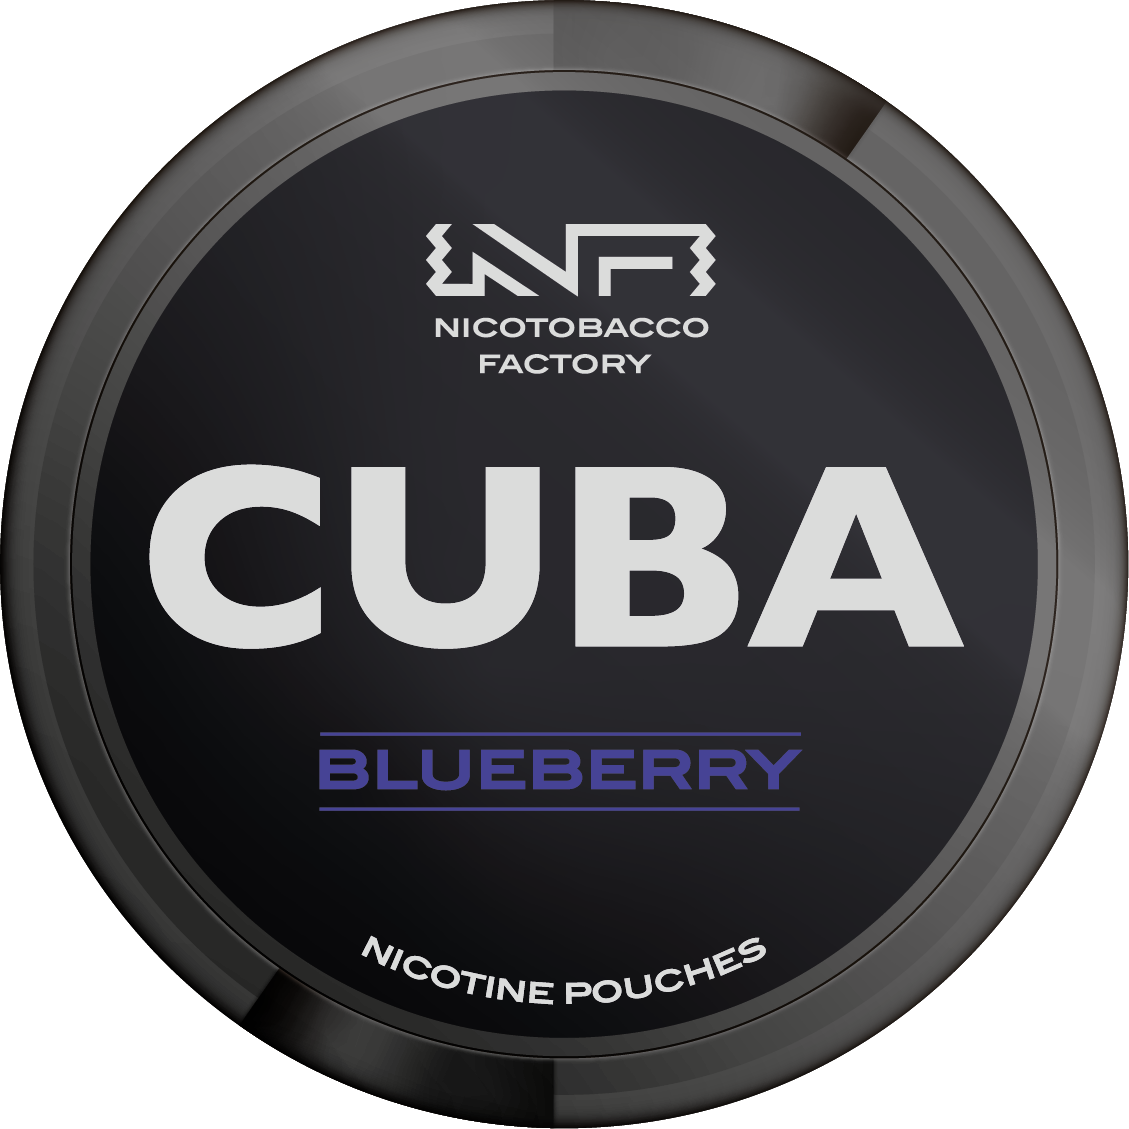 Black Blueberry Nicotine Pouches By Cuba